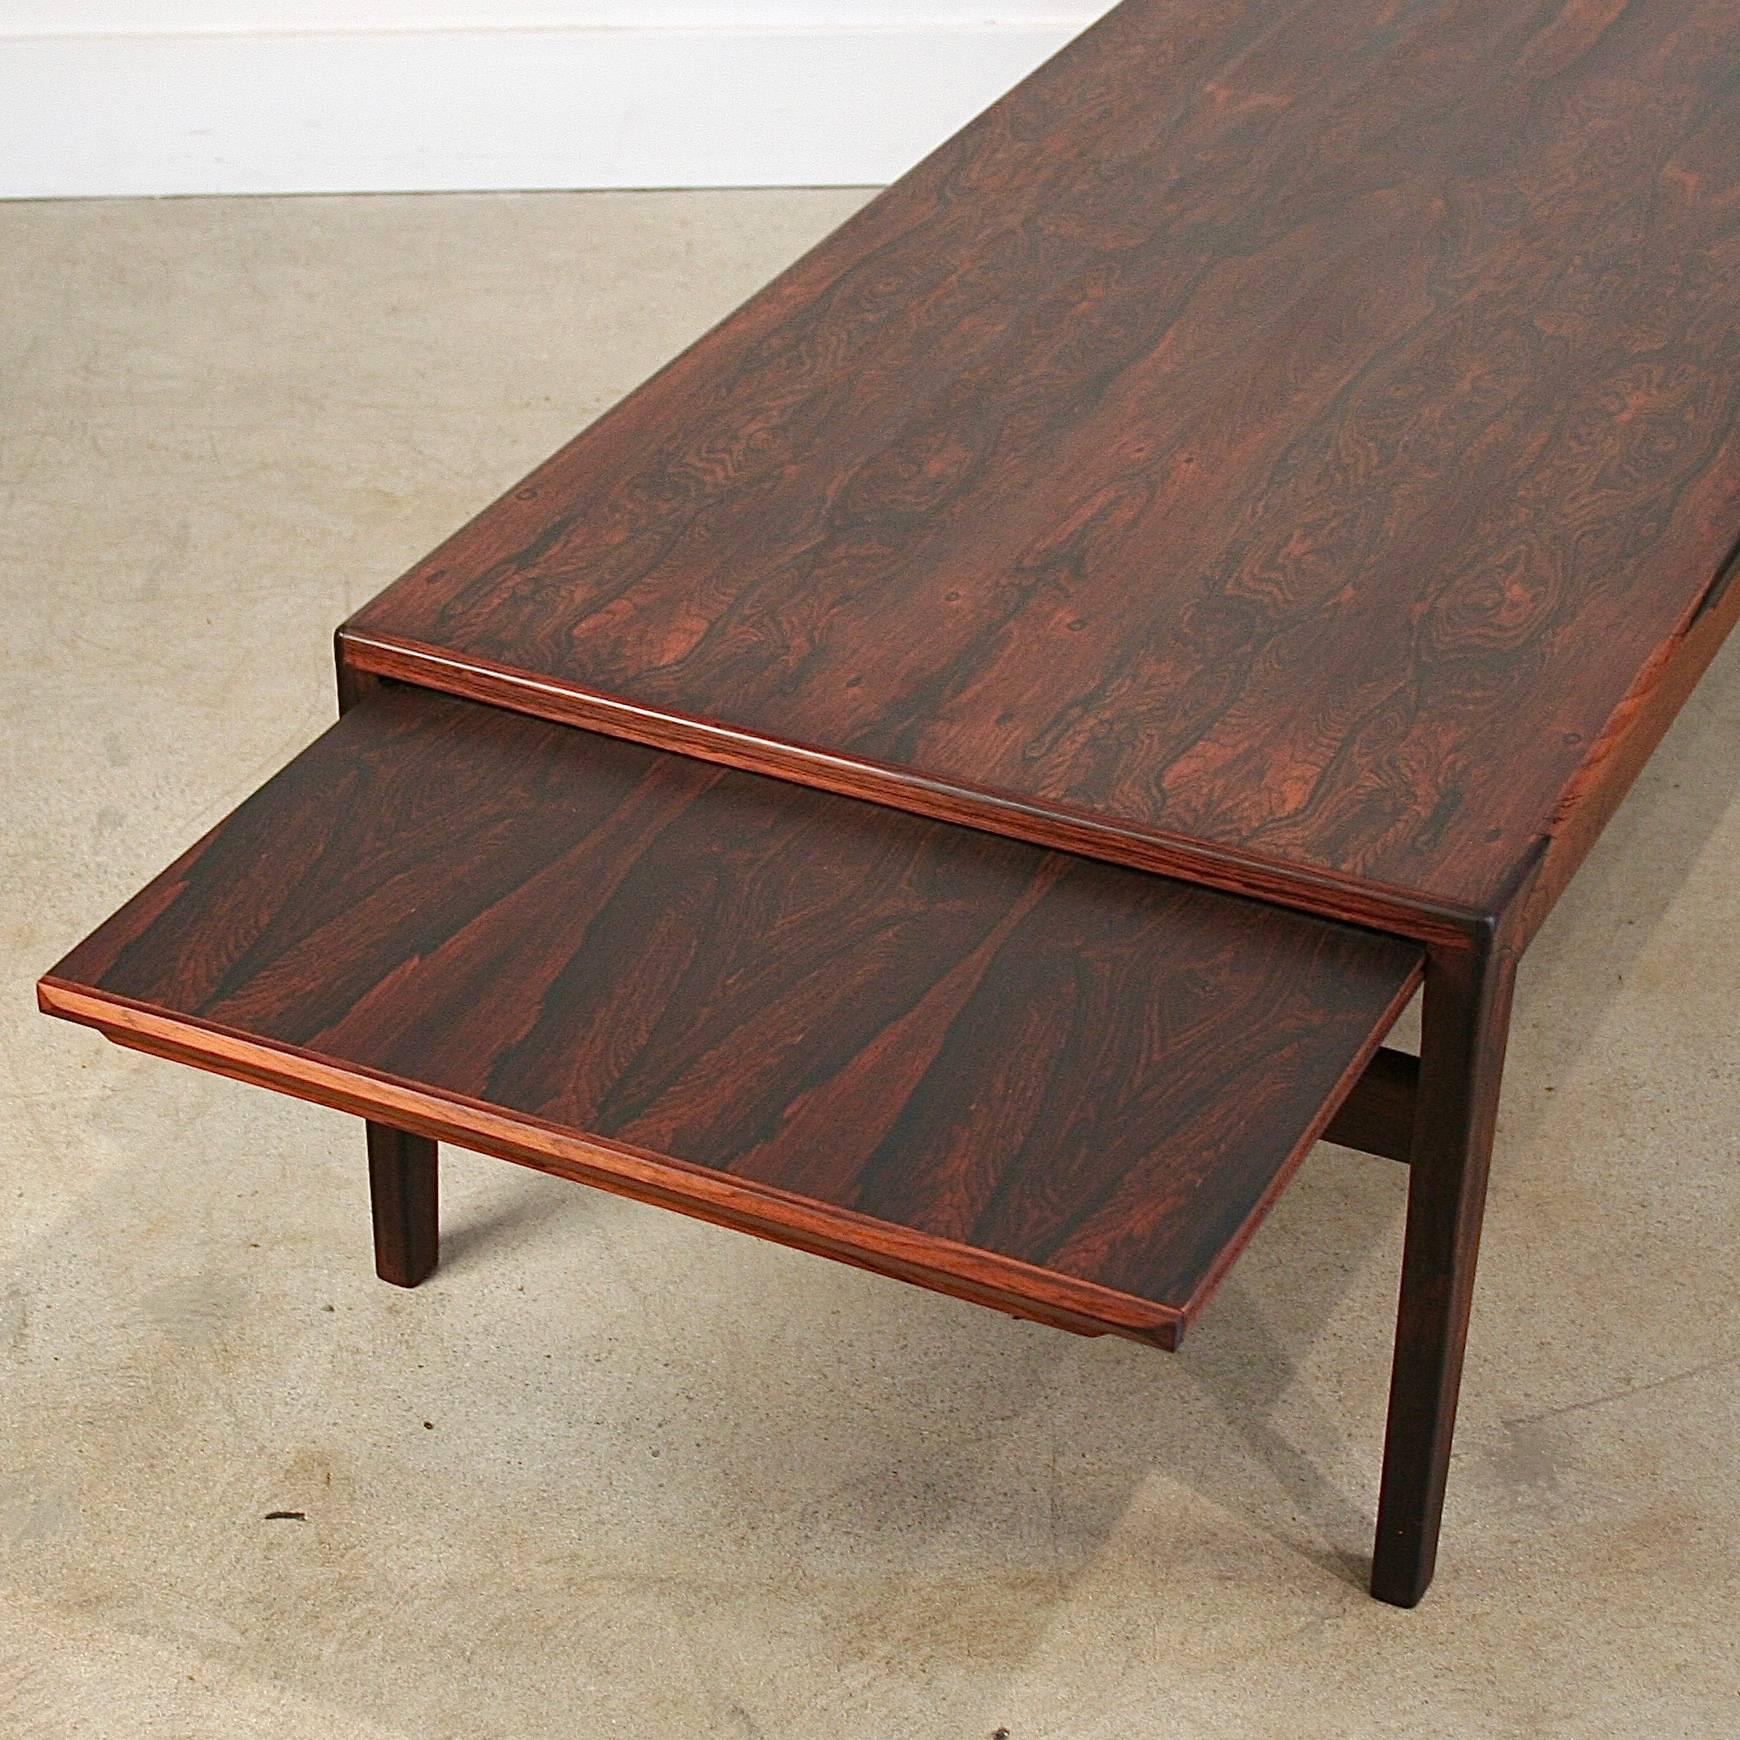 Vintage Danish Rosewood Coffee Table In Excellent Condition For Sale In Vancouver, BC